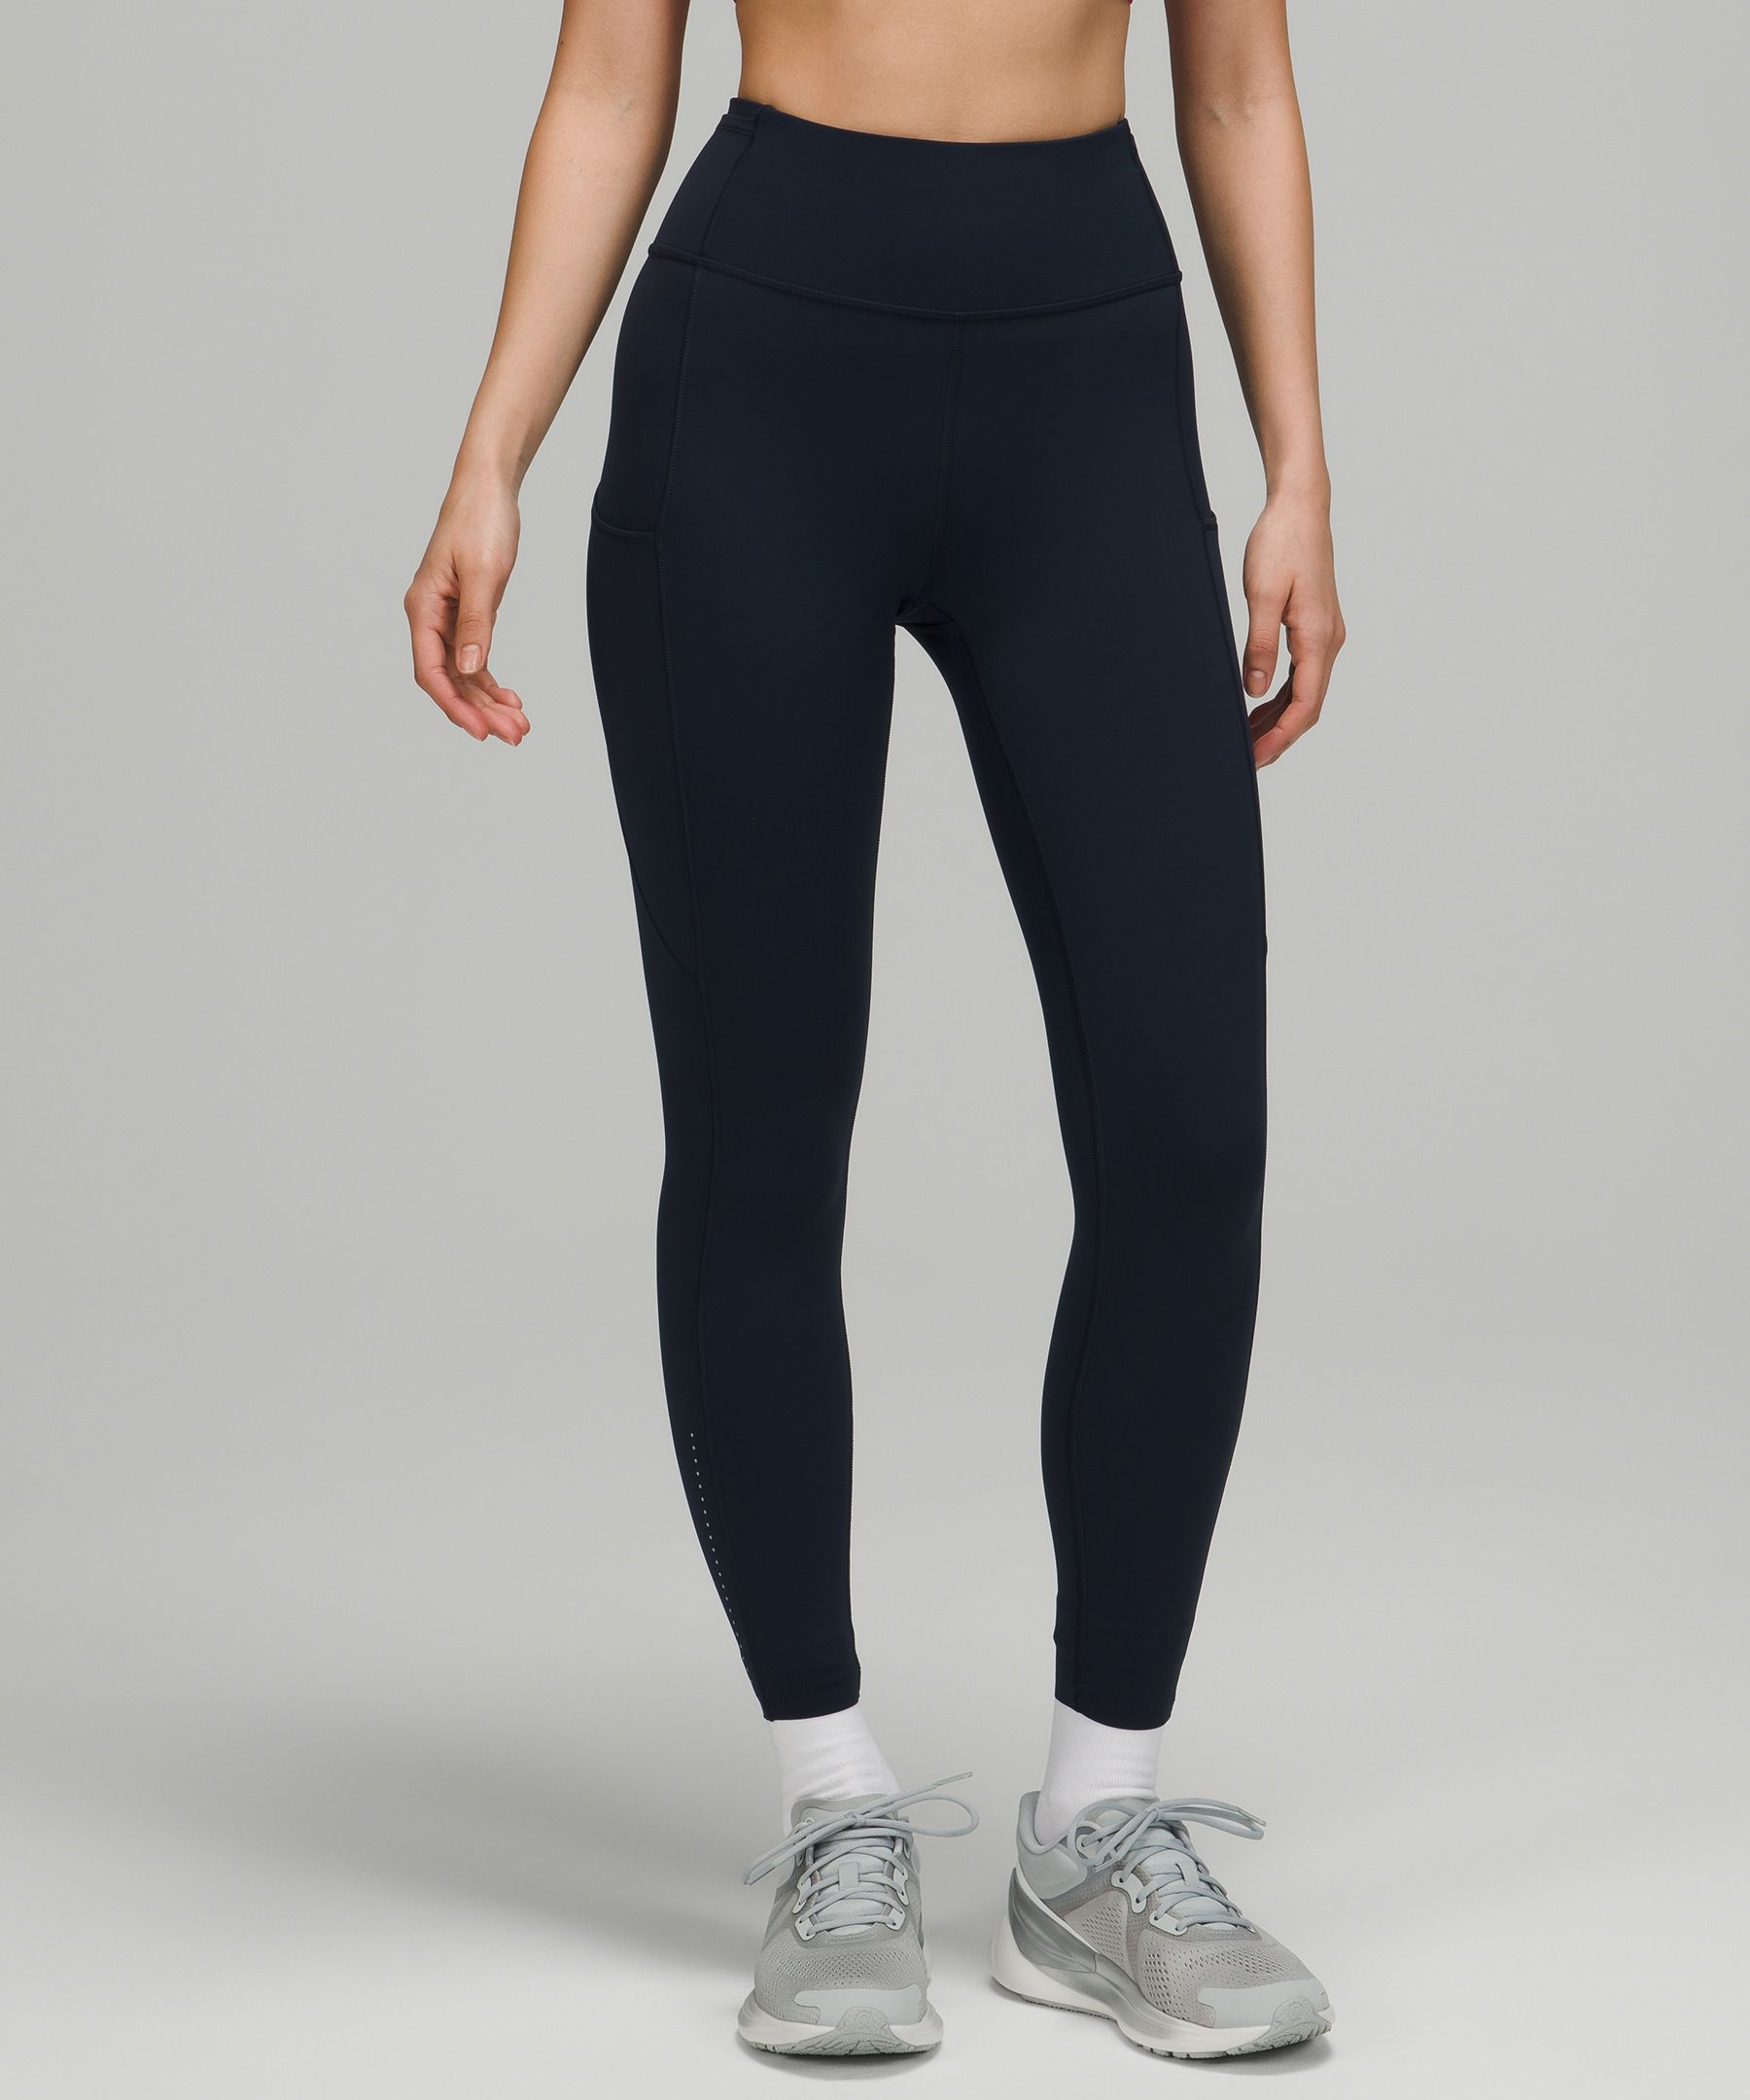 Lululemon Fast & Free 7/8 Tight II *Non-Reflective Nulux 24”